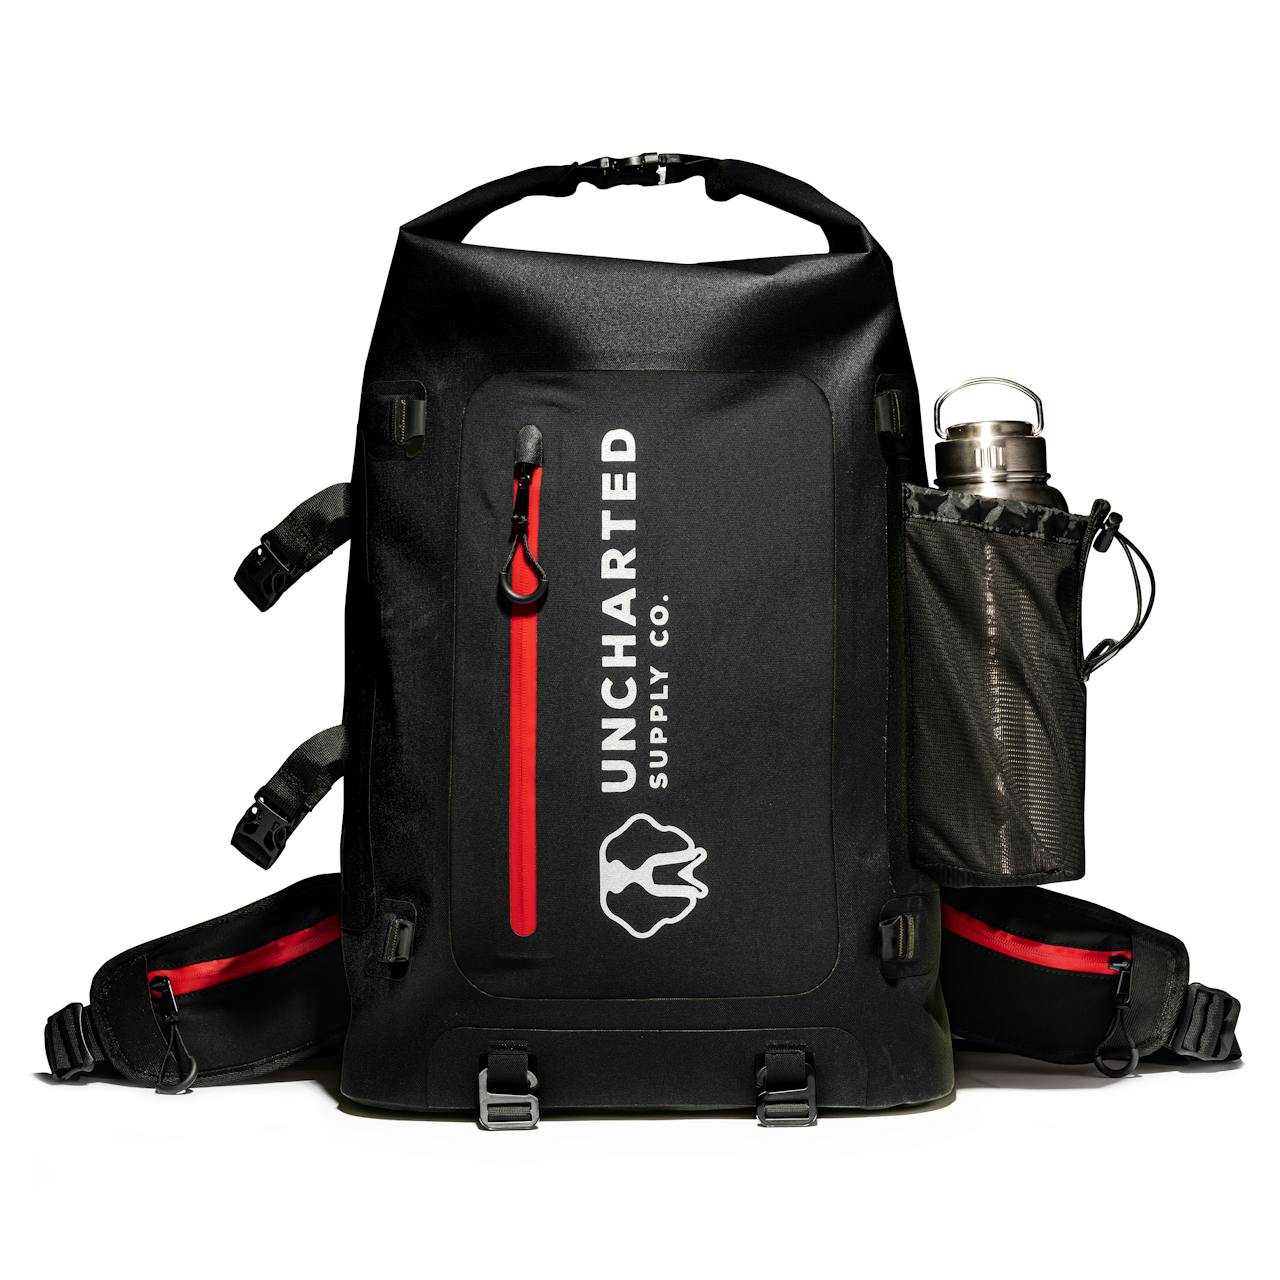 Uncharted Supply Co. The Seventy2 Pro Survival System